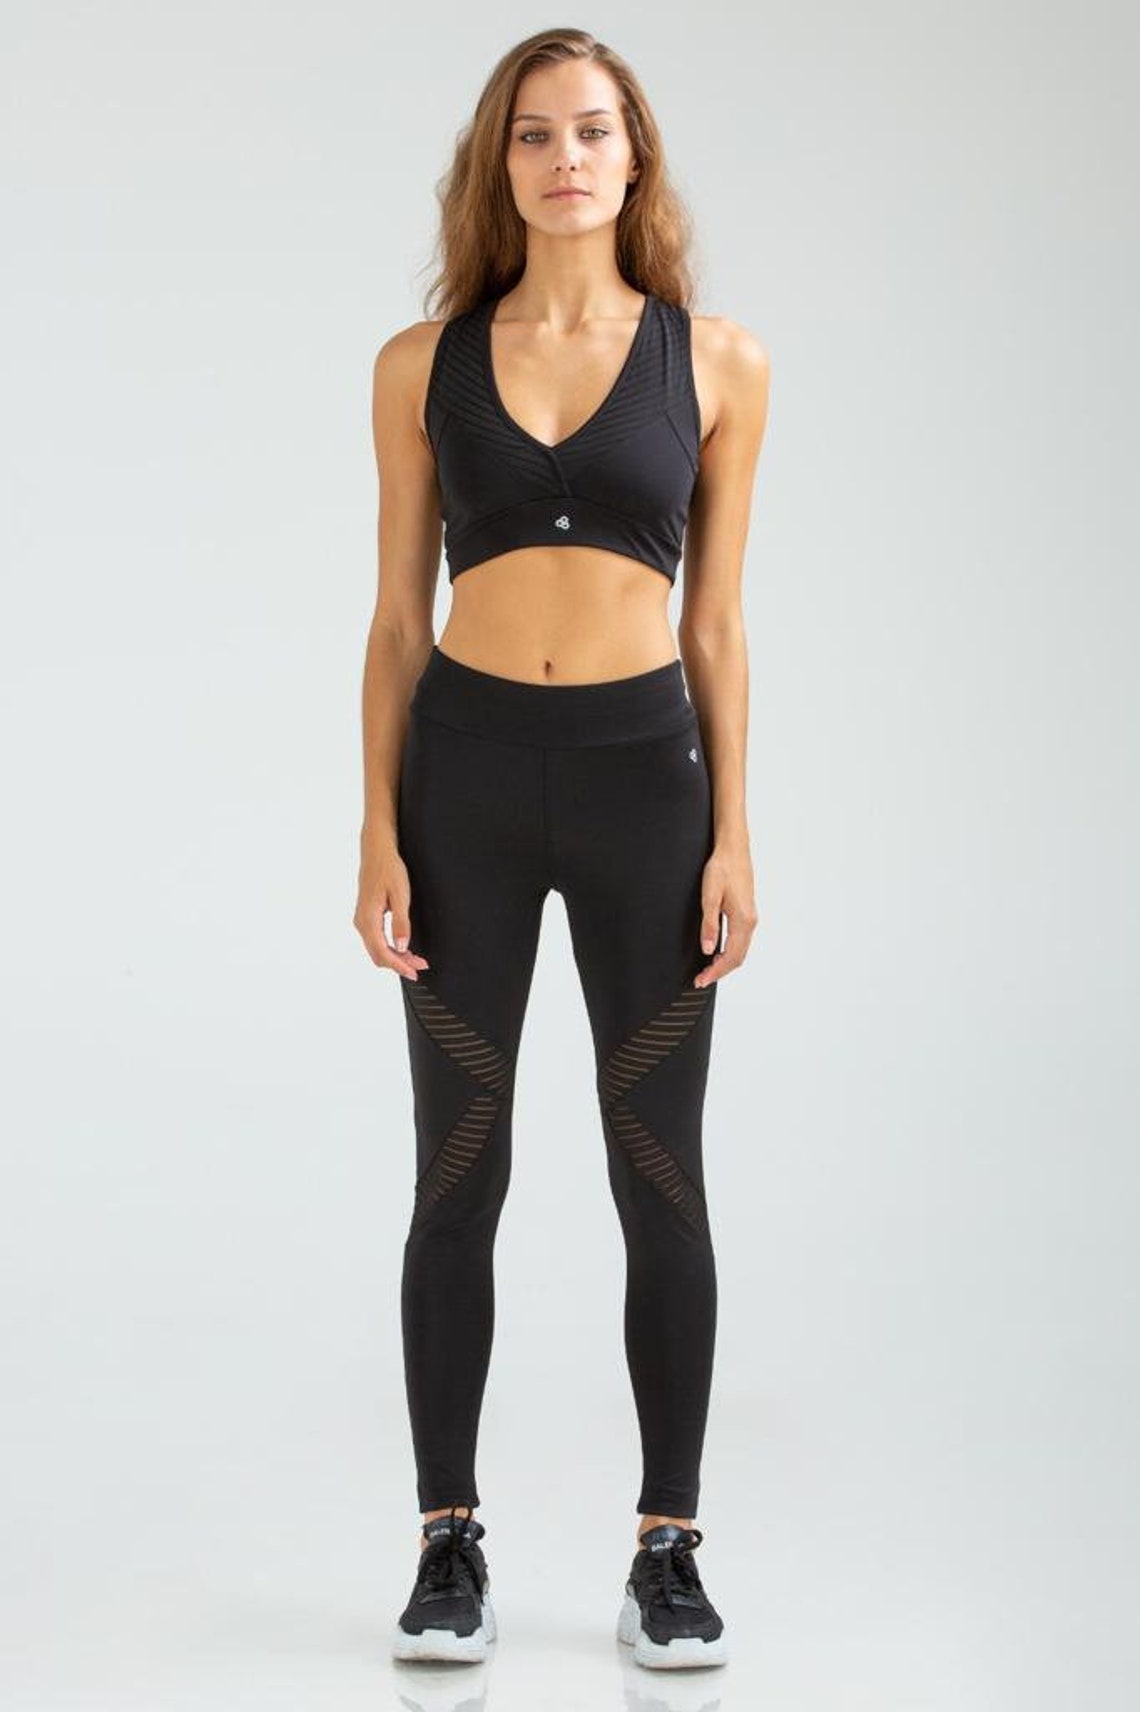 High Waisted Black Leggings And Sports Bra Set With Mesh Etsy